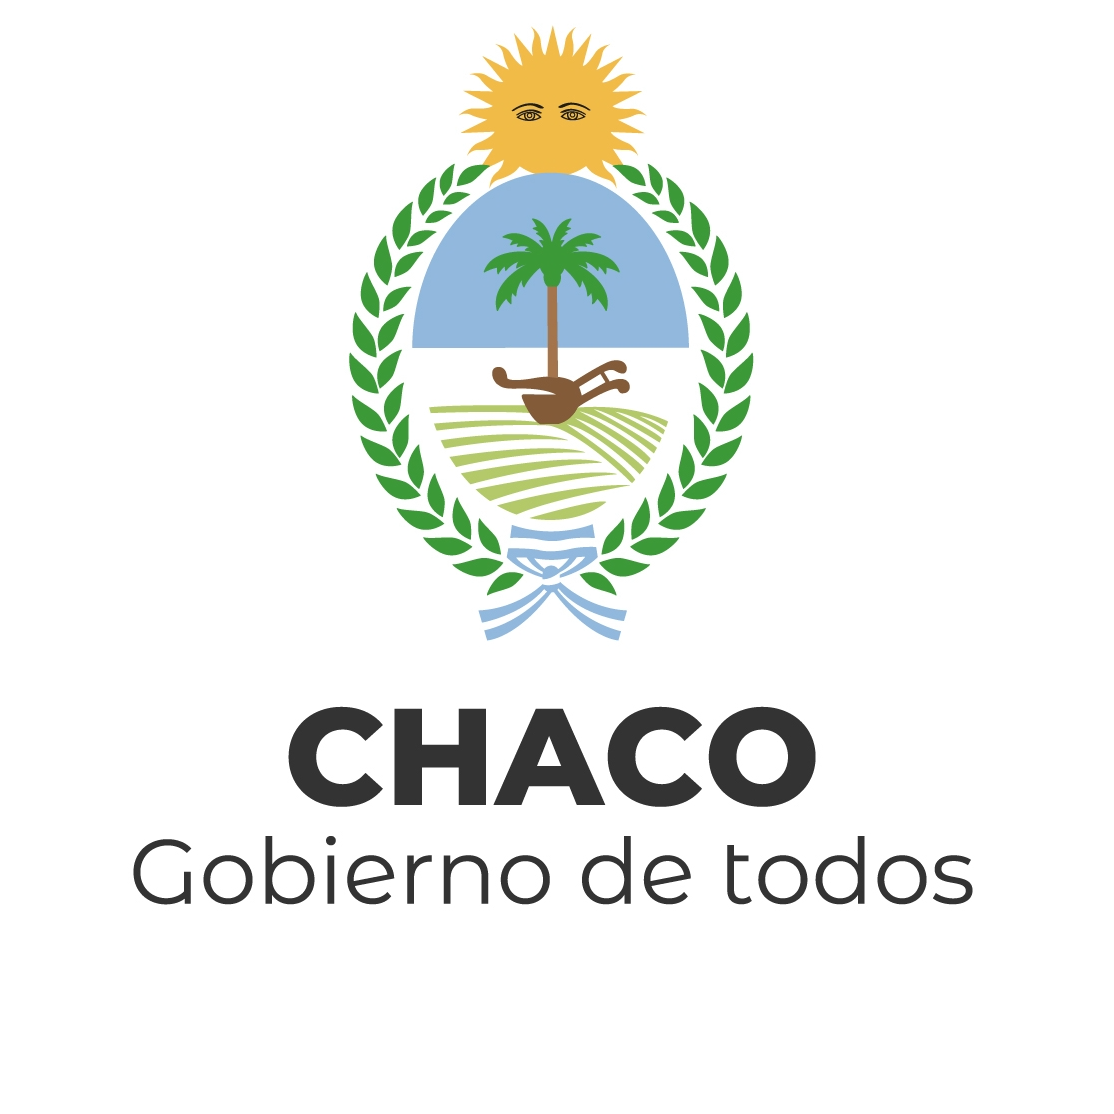 Provincial Government of Chaco, Argentina